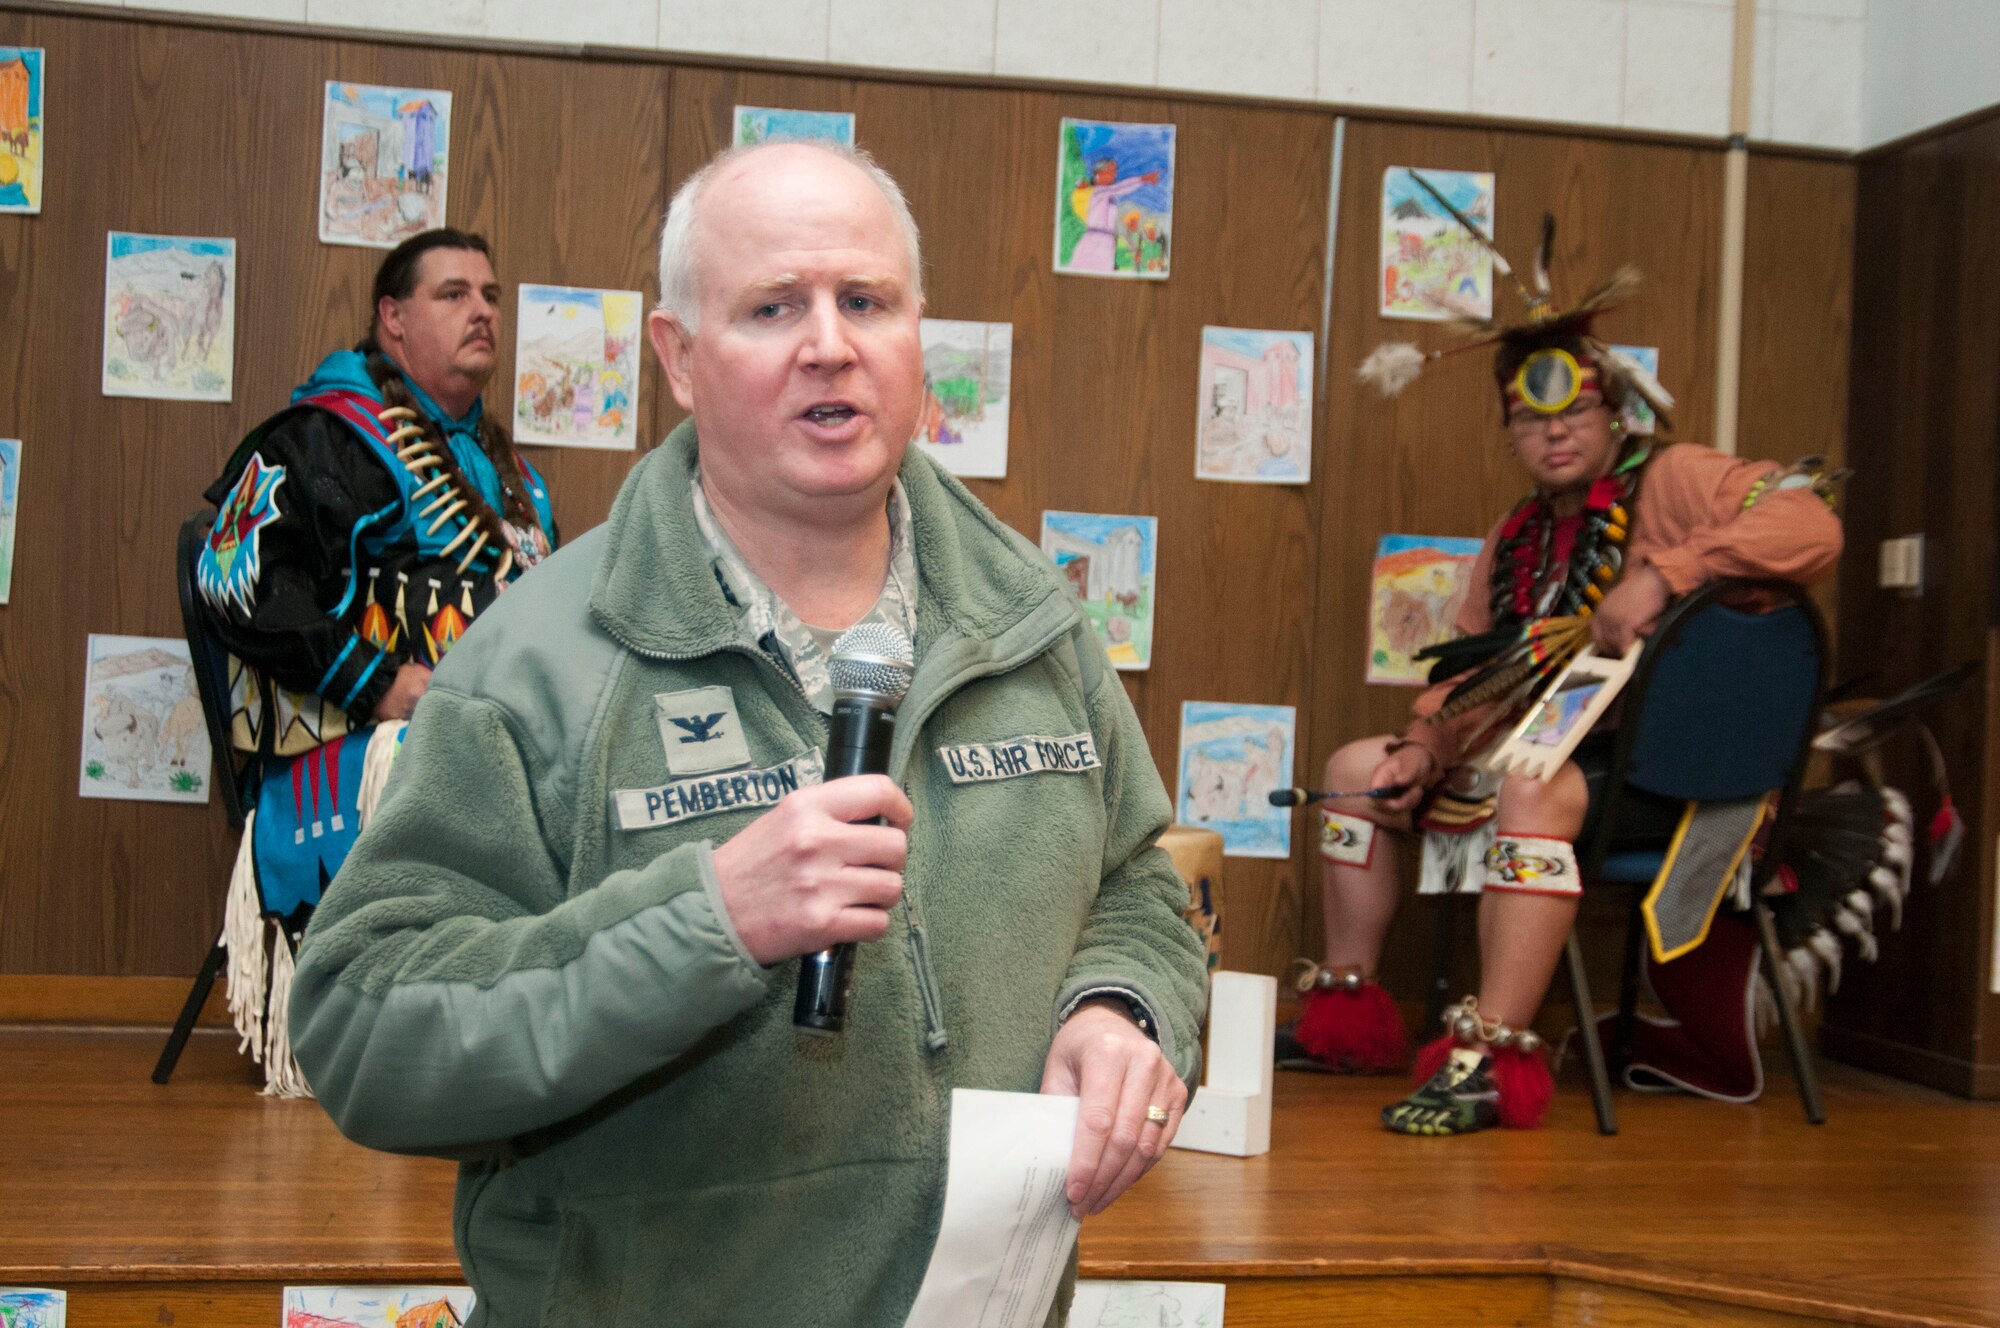 Col. Thomas “Thom” Pemberton, 459th Operations Group commander and host for the Native American Heritage Month culmination celebration, provides opening remarks for the event in the 459th Air Refueling Wing auditorium Nov. 30, 2015. This year’s event included traditional food tasting, books, beadwork, weaponry, music and dancing from half a dozen Native American tribes. (U.S. Air Force photo by Staff Sgt. Kat Justen) 
